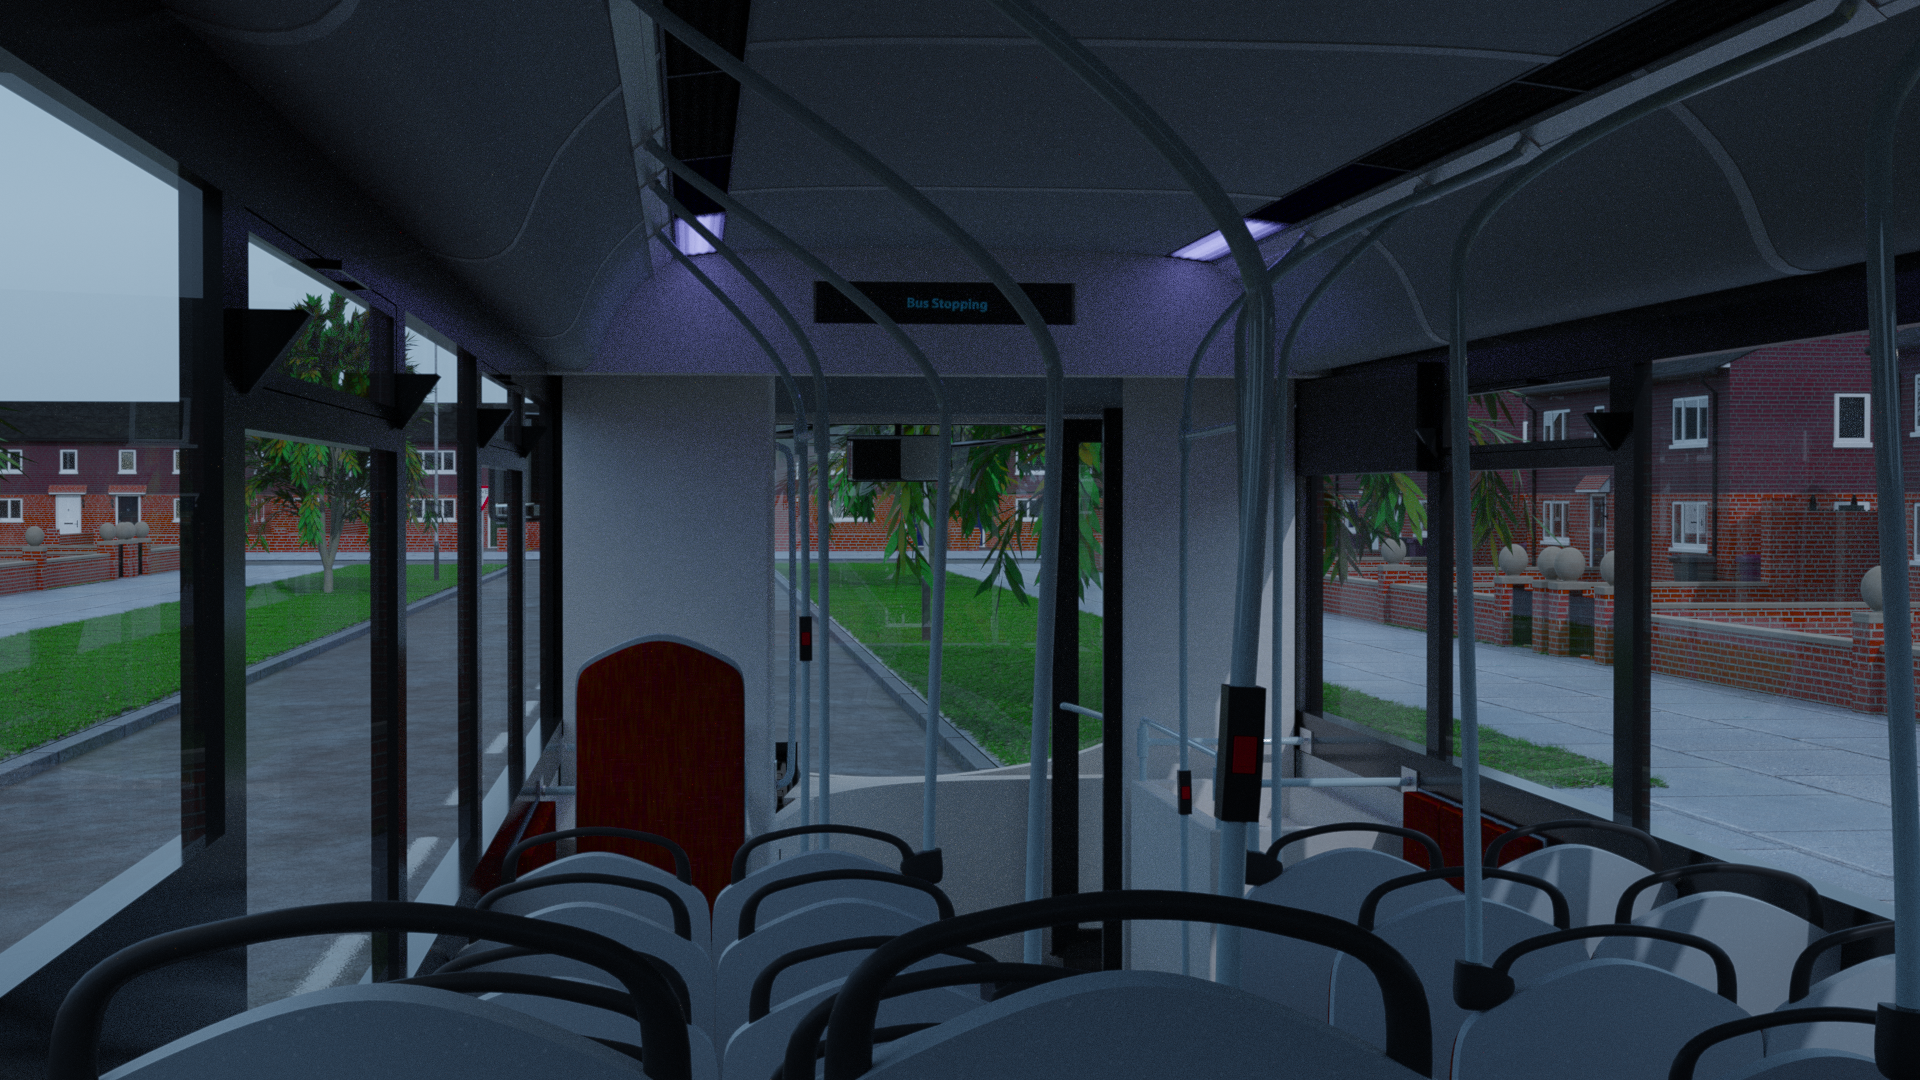 Transit Bus | Two Service Doors preview image 2